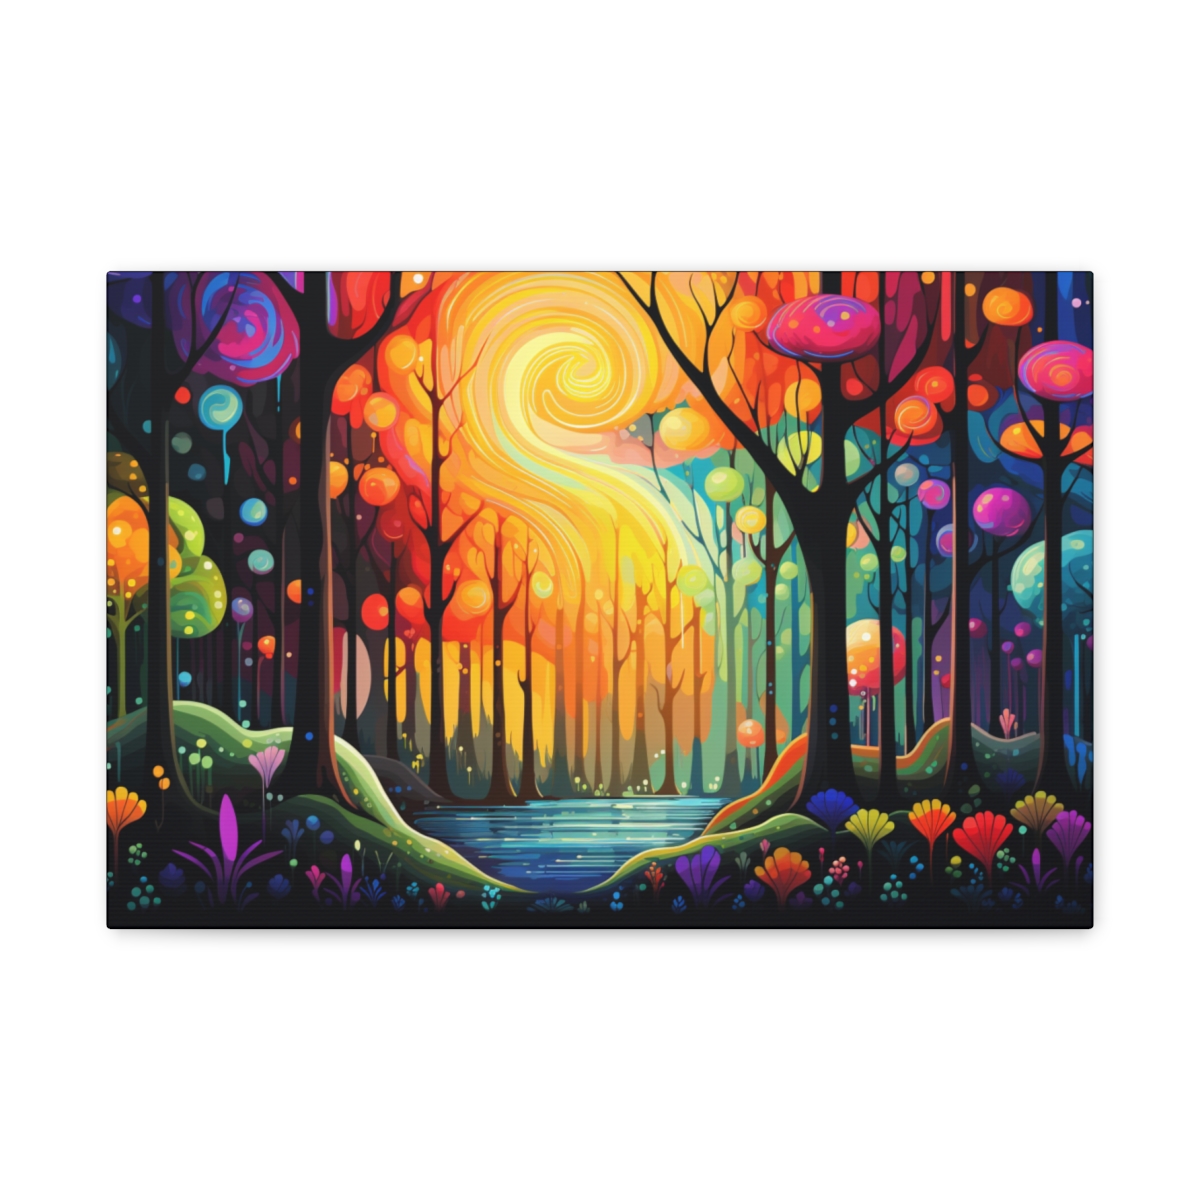 Winter Forest Art Canvas Print: Winter's Lullaby